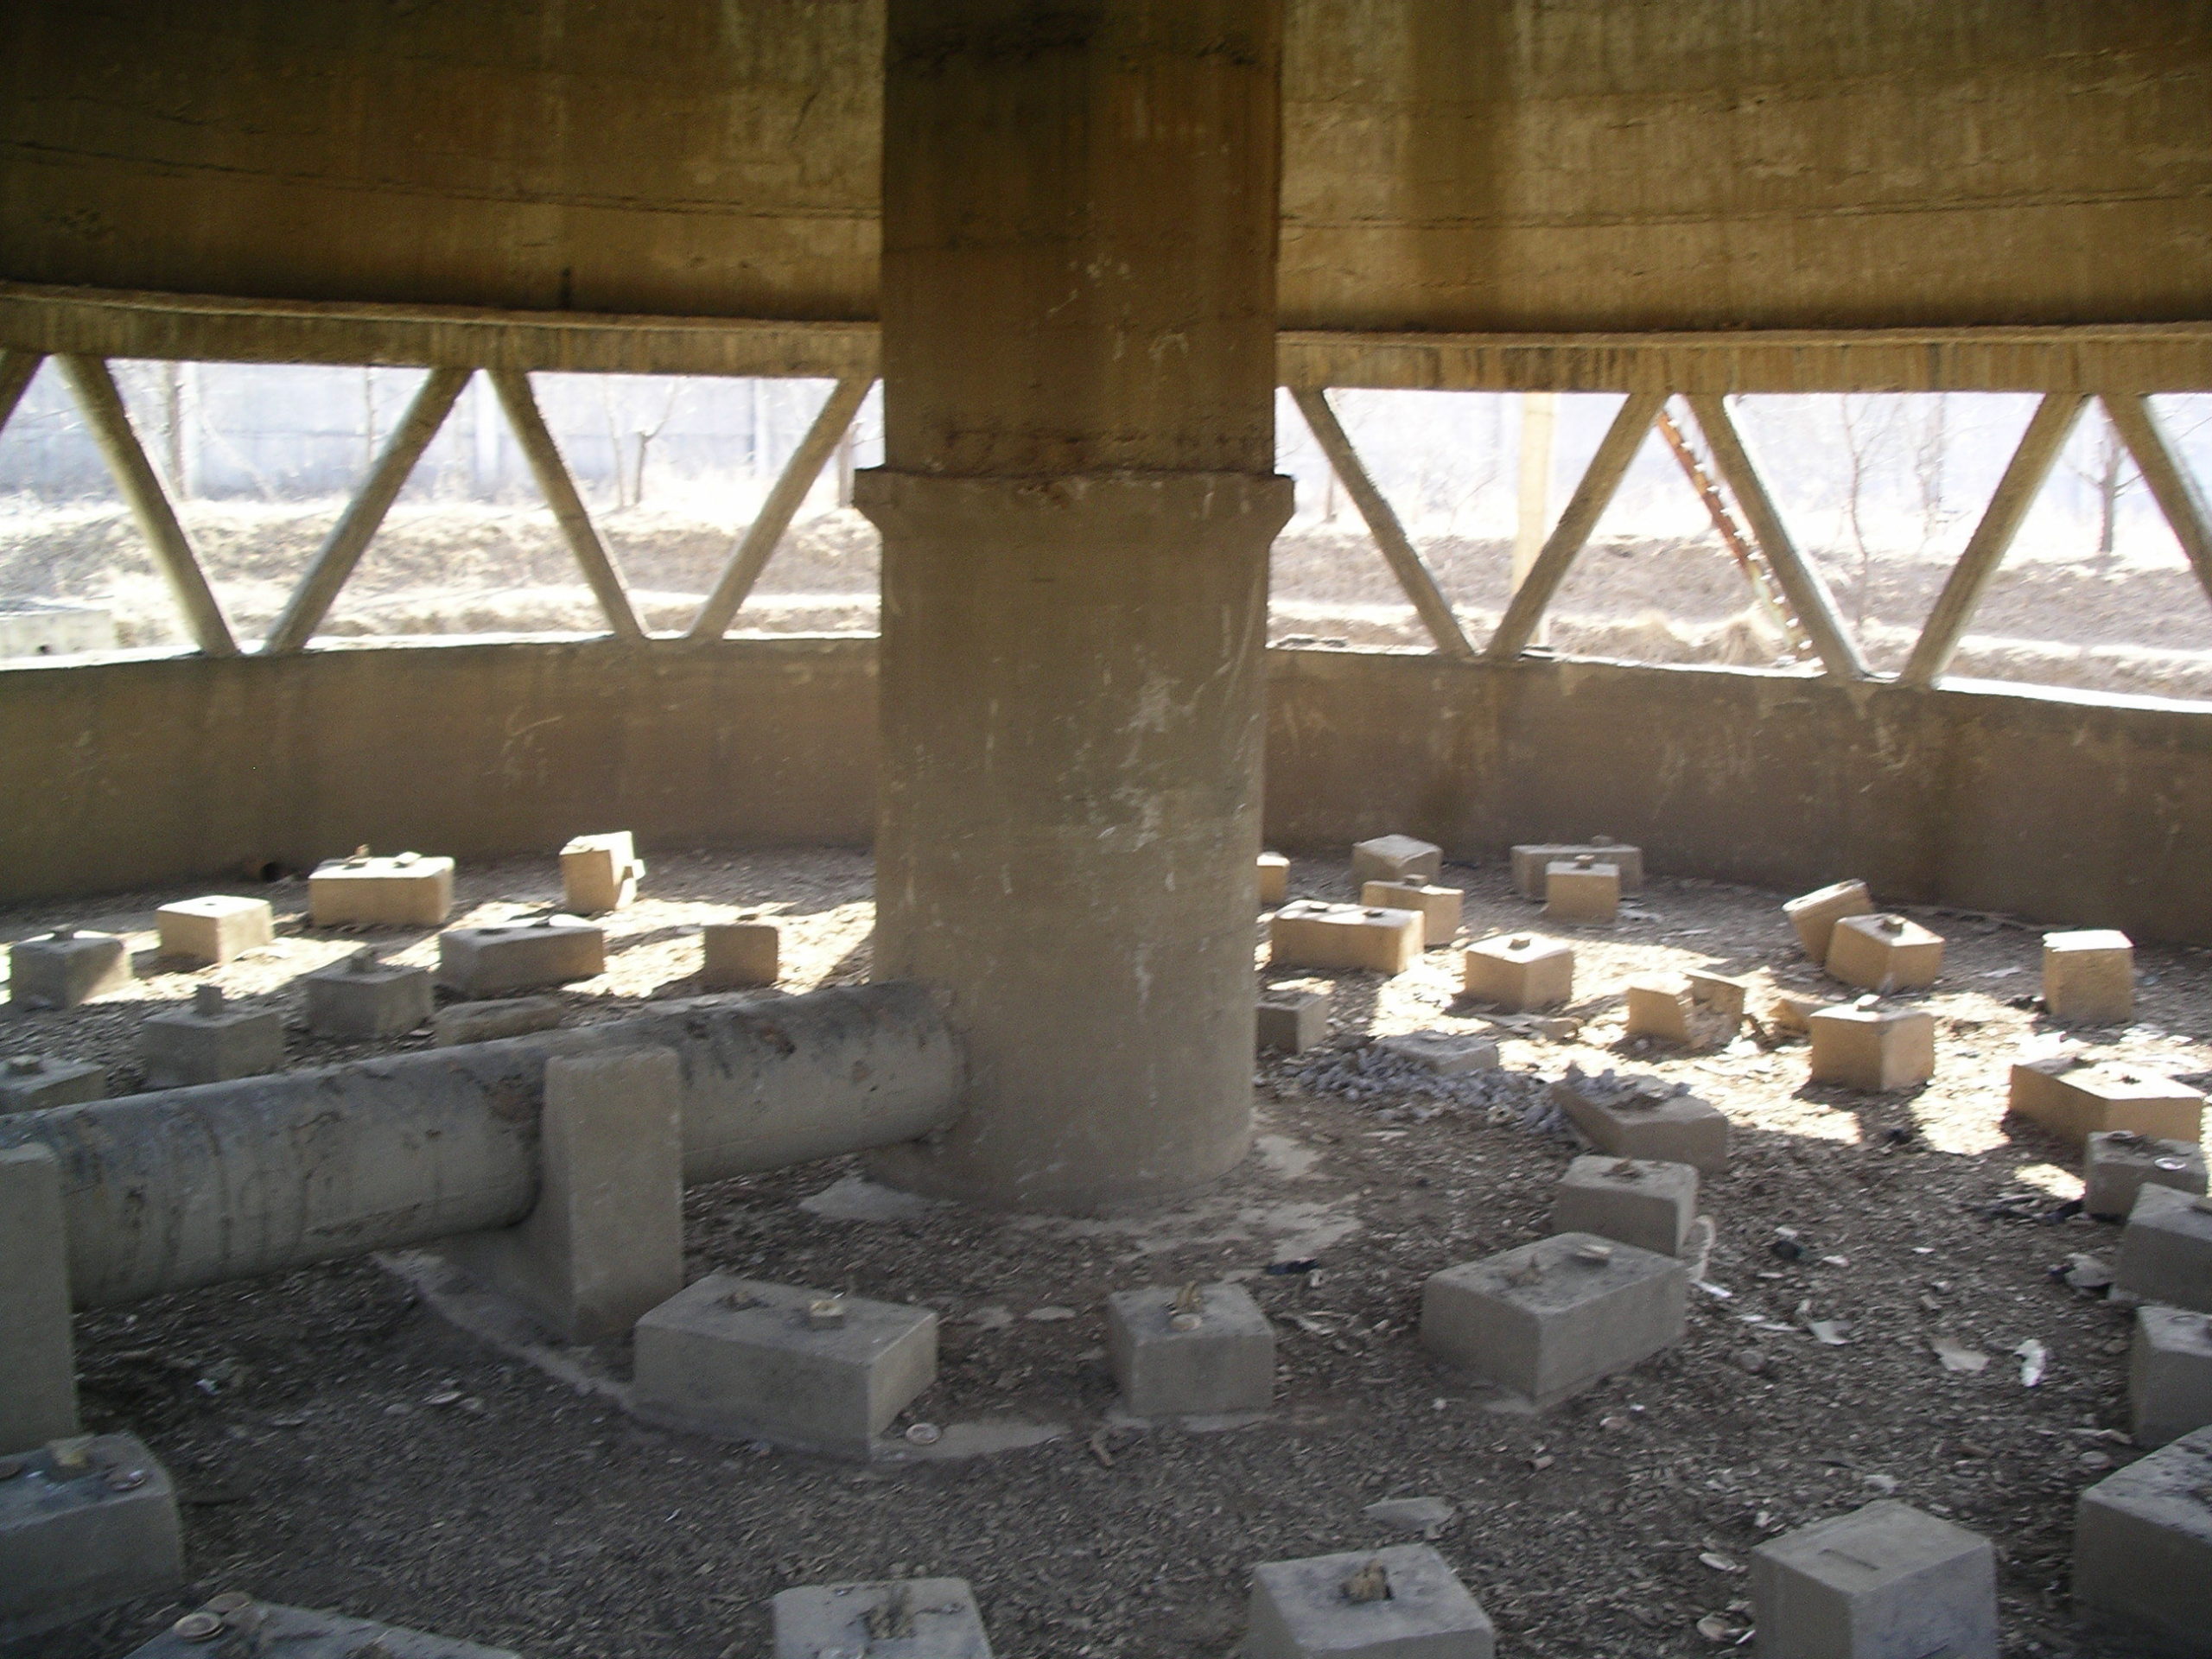 An open foundation of the cooling tower with concrete blocks strewn around in concentric pattern and other pieces of removed piping